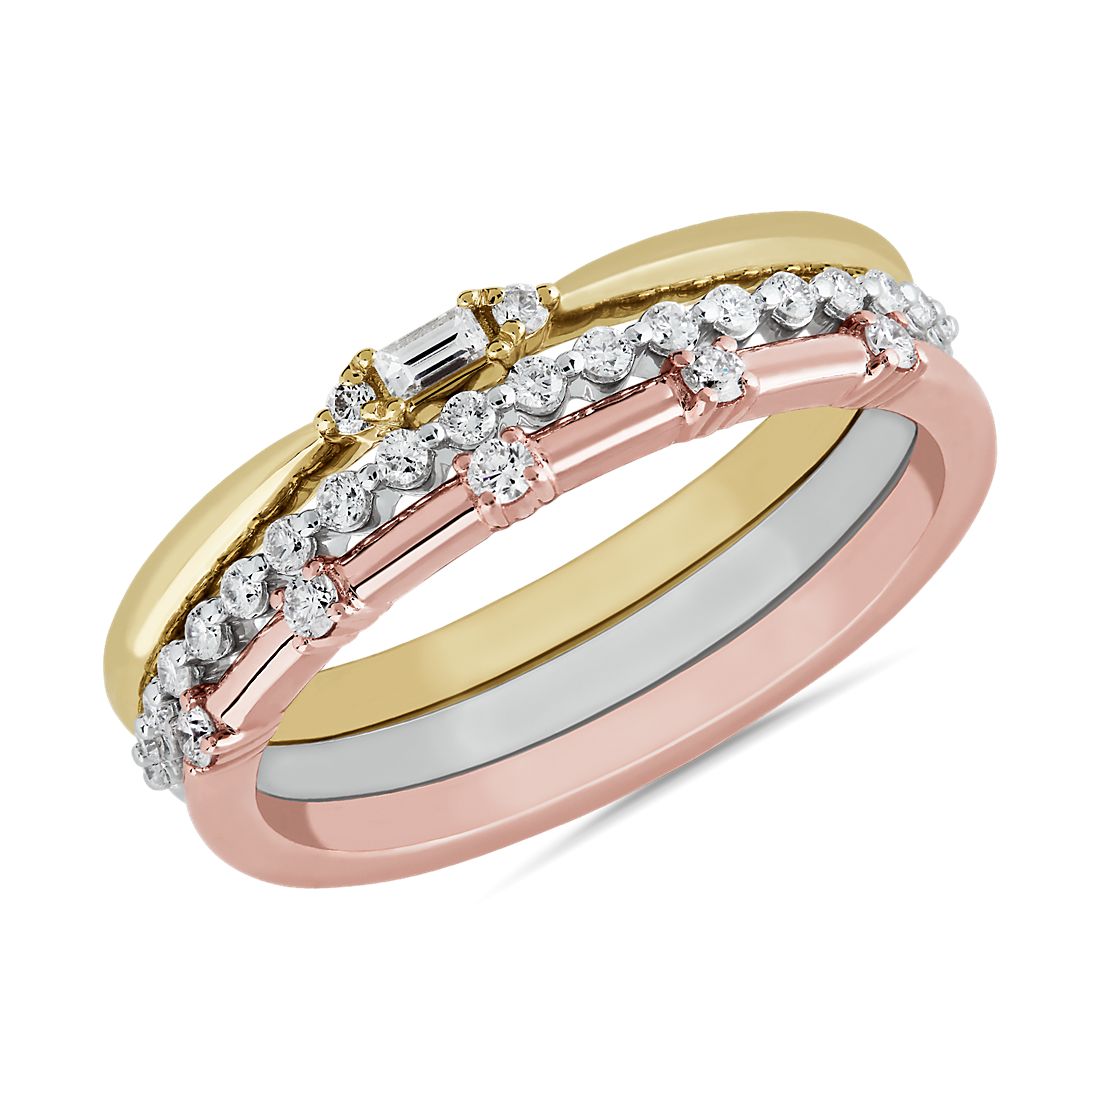 Delicate Diamond Stacking Ring Set in 14k White, Yellow, and Rose Gold (1/5 ct. tw.)